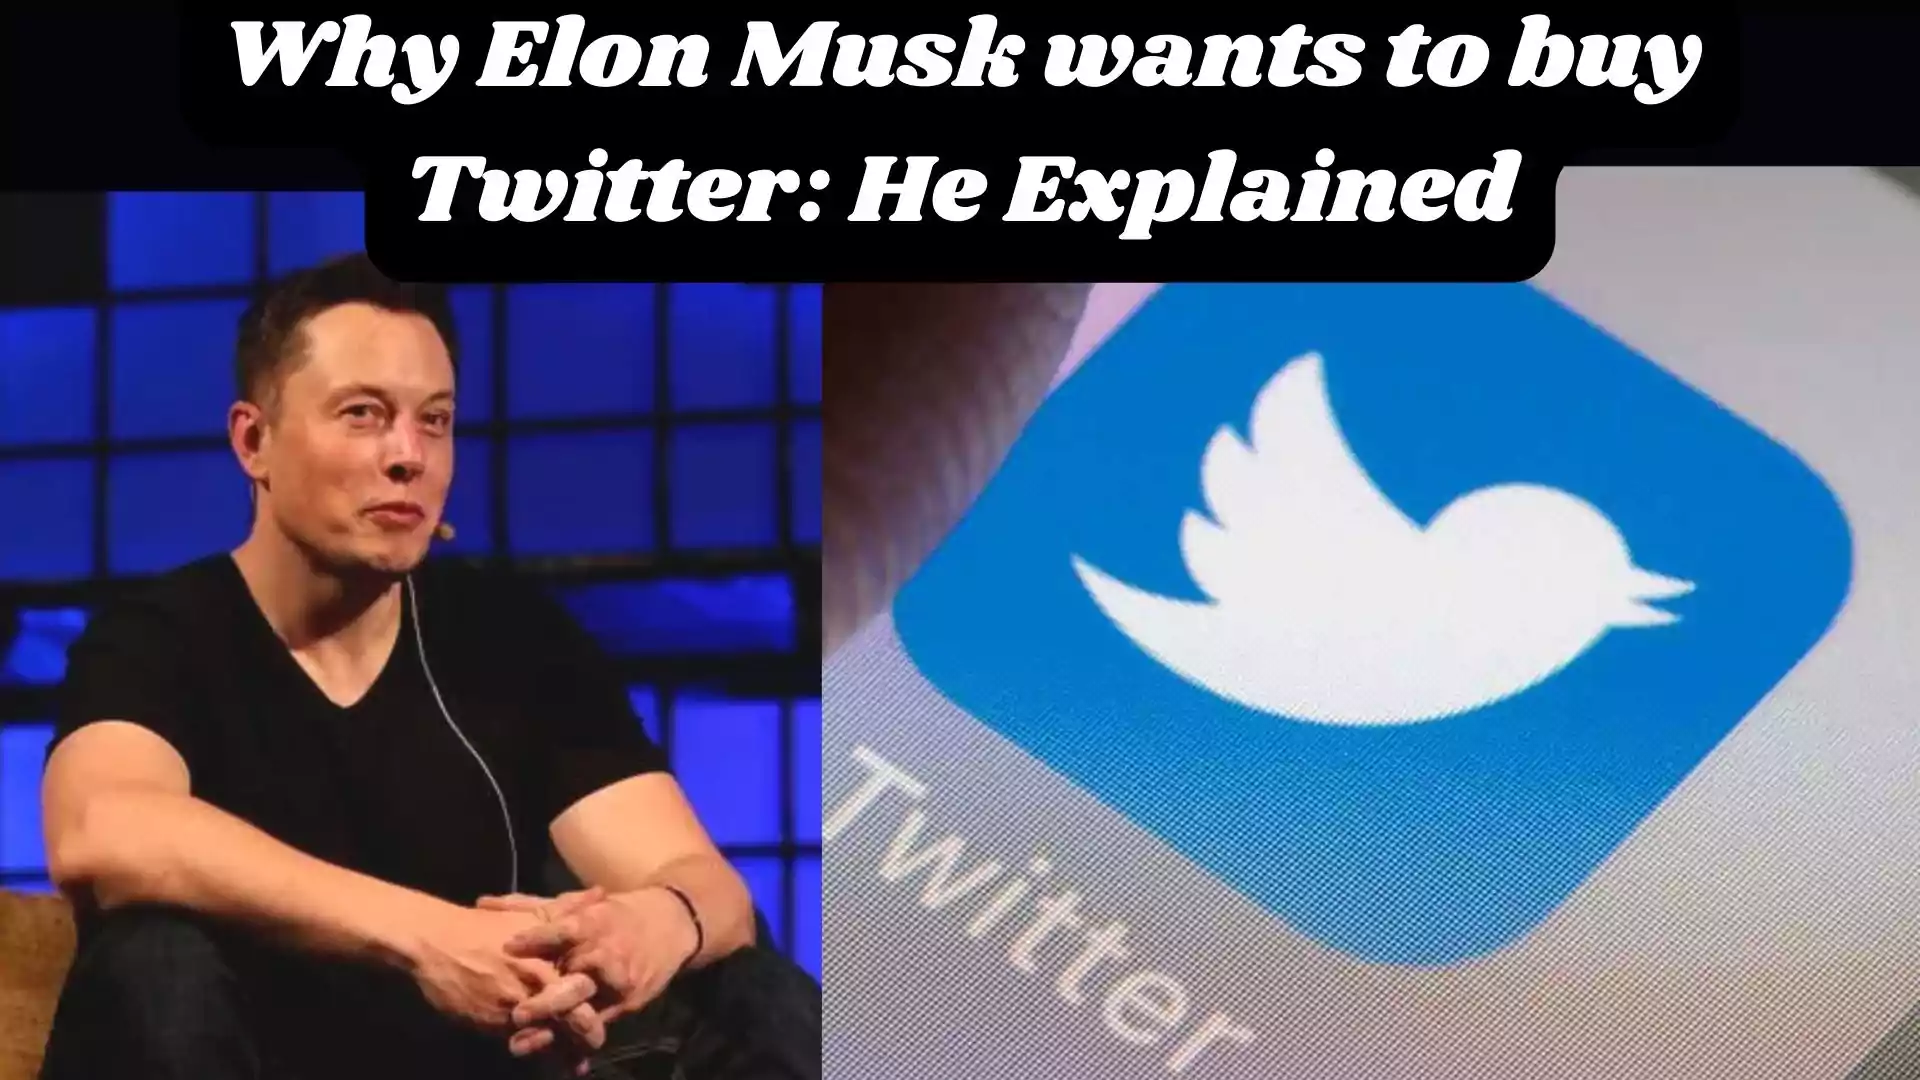 Why Elon Musk wants to buy Twitter: He Explained